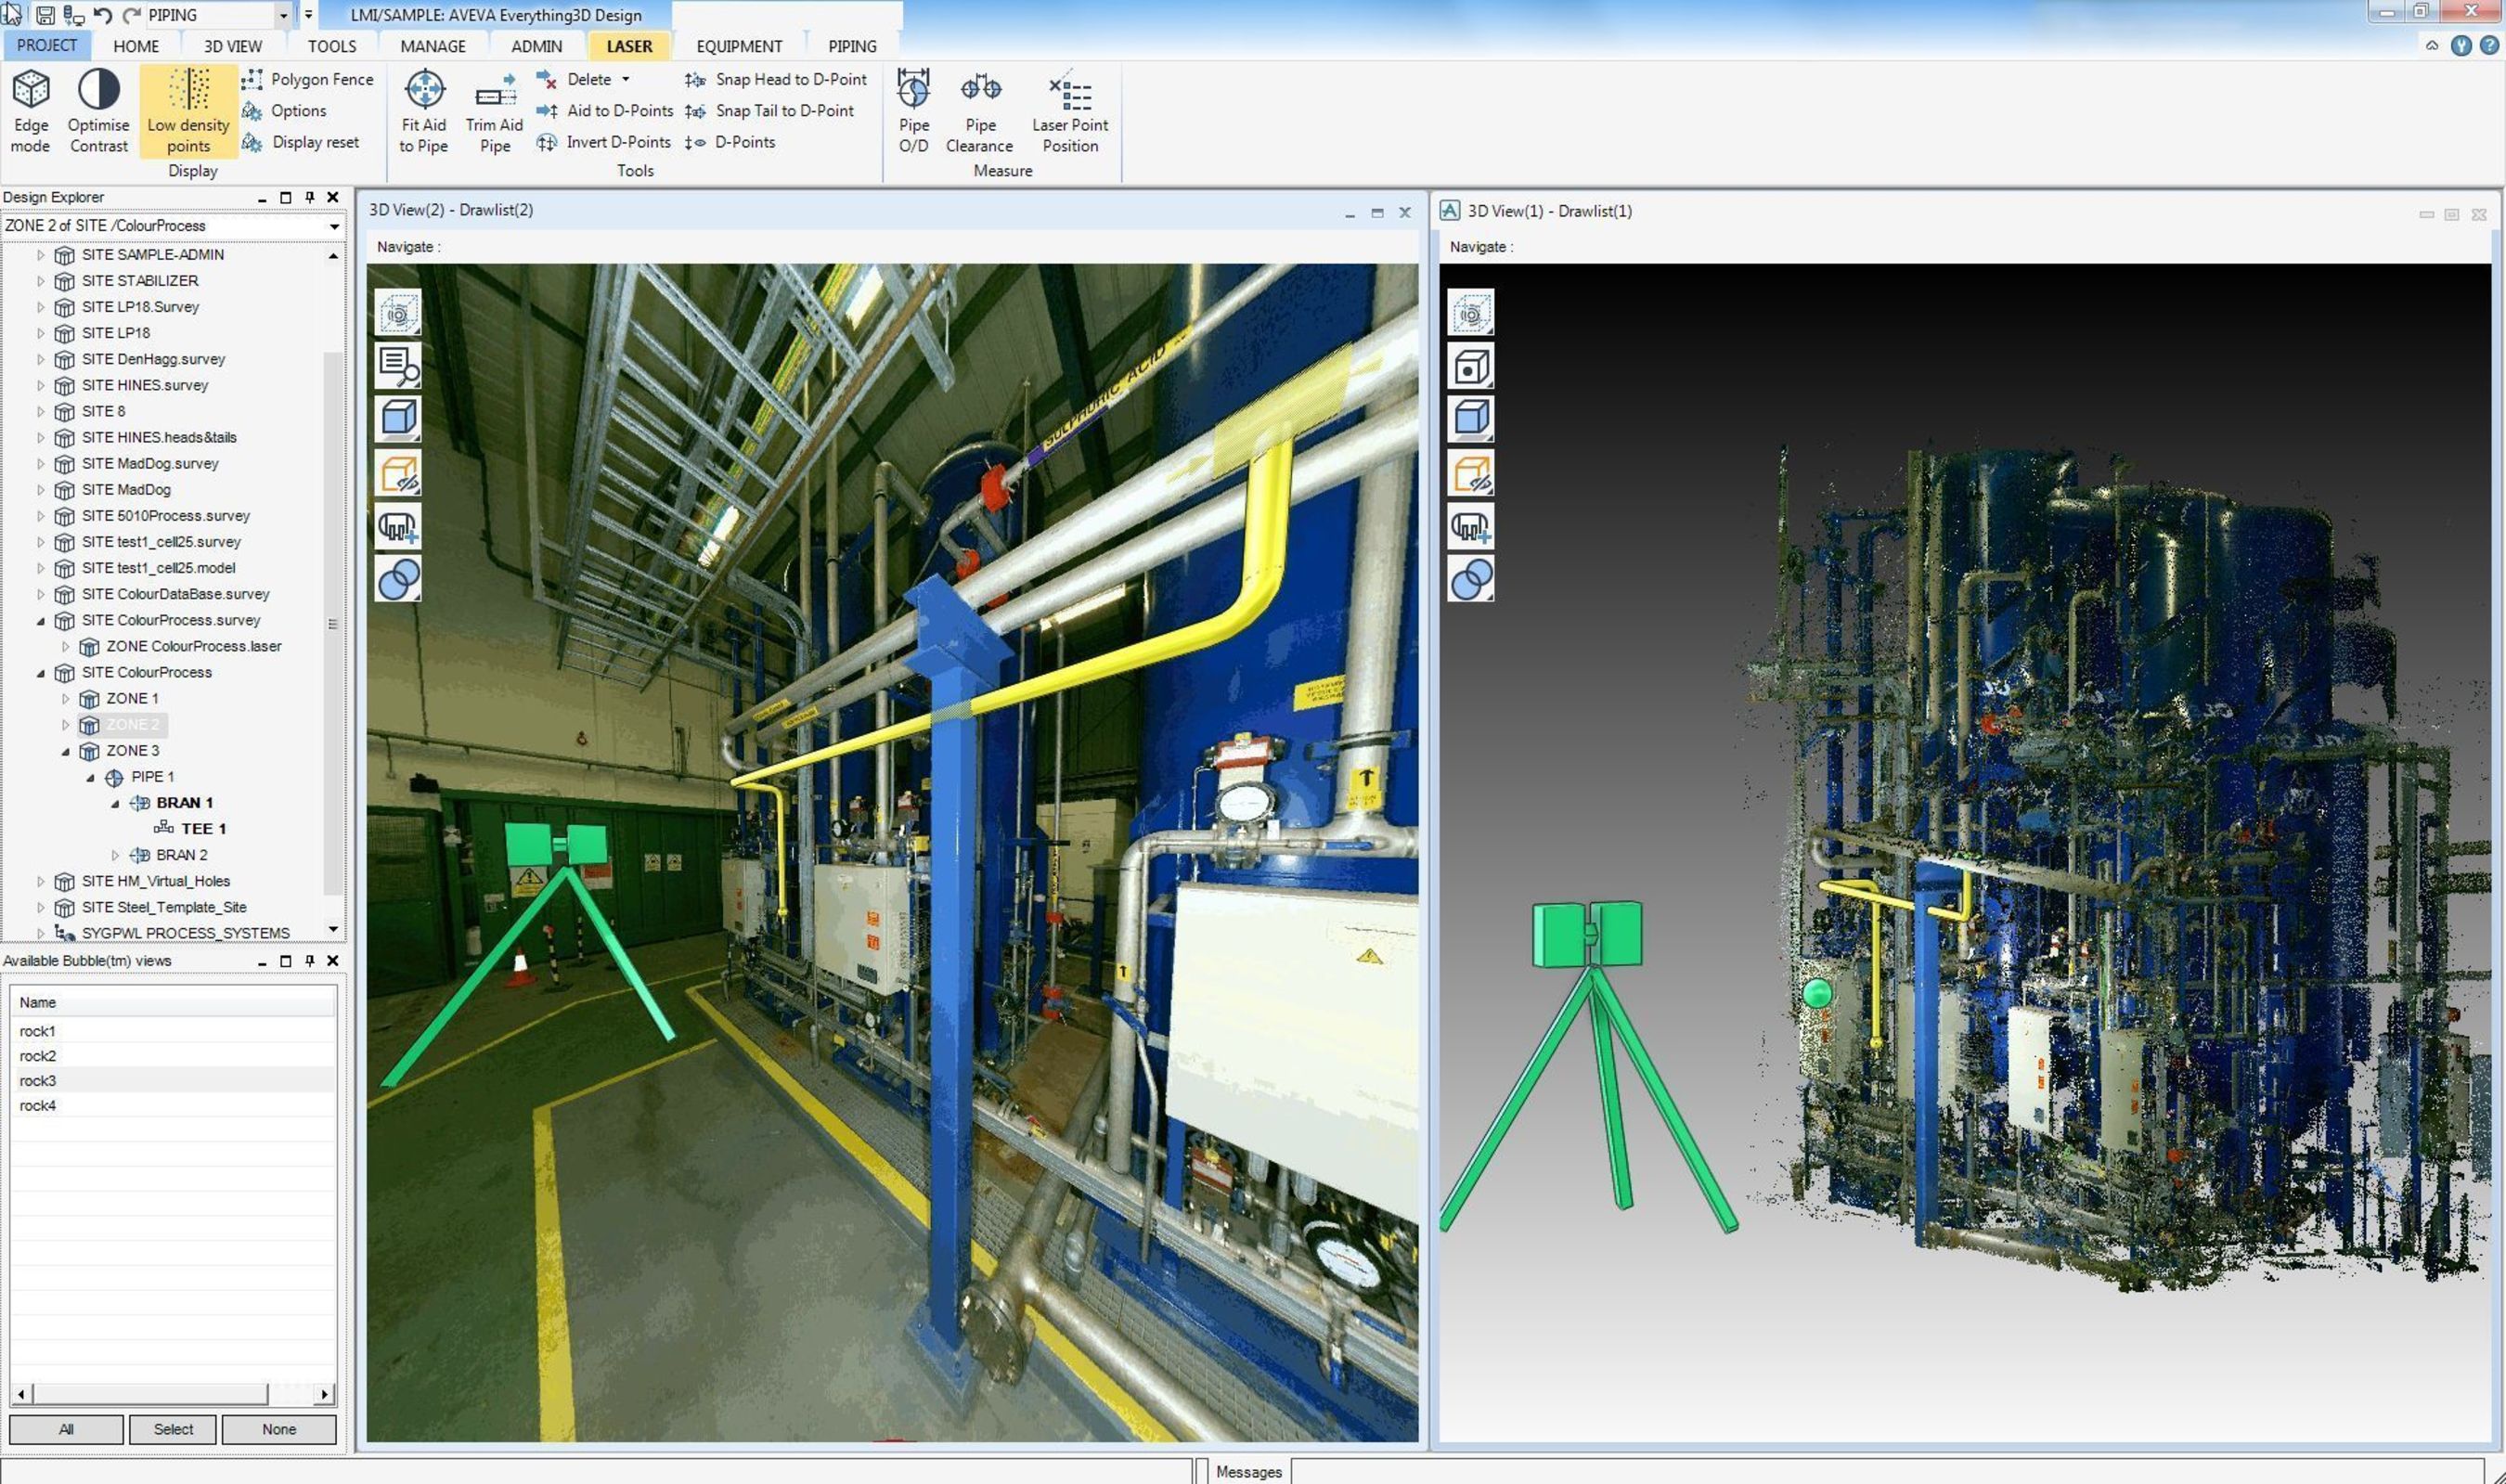 Laser scanning technology integrated with design modelling in AVEVA Everything3D (E3D) (PRNewsFoto/Aveva Group Plc)